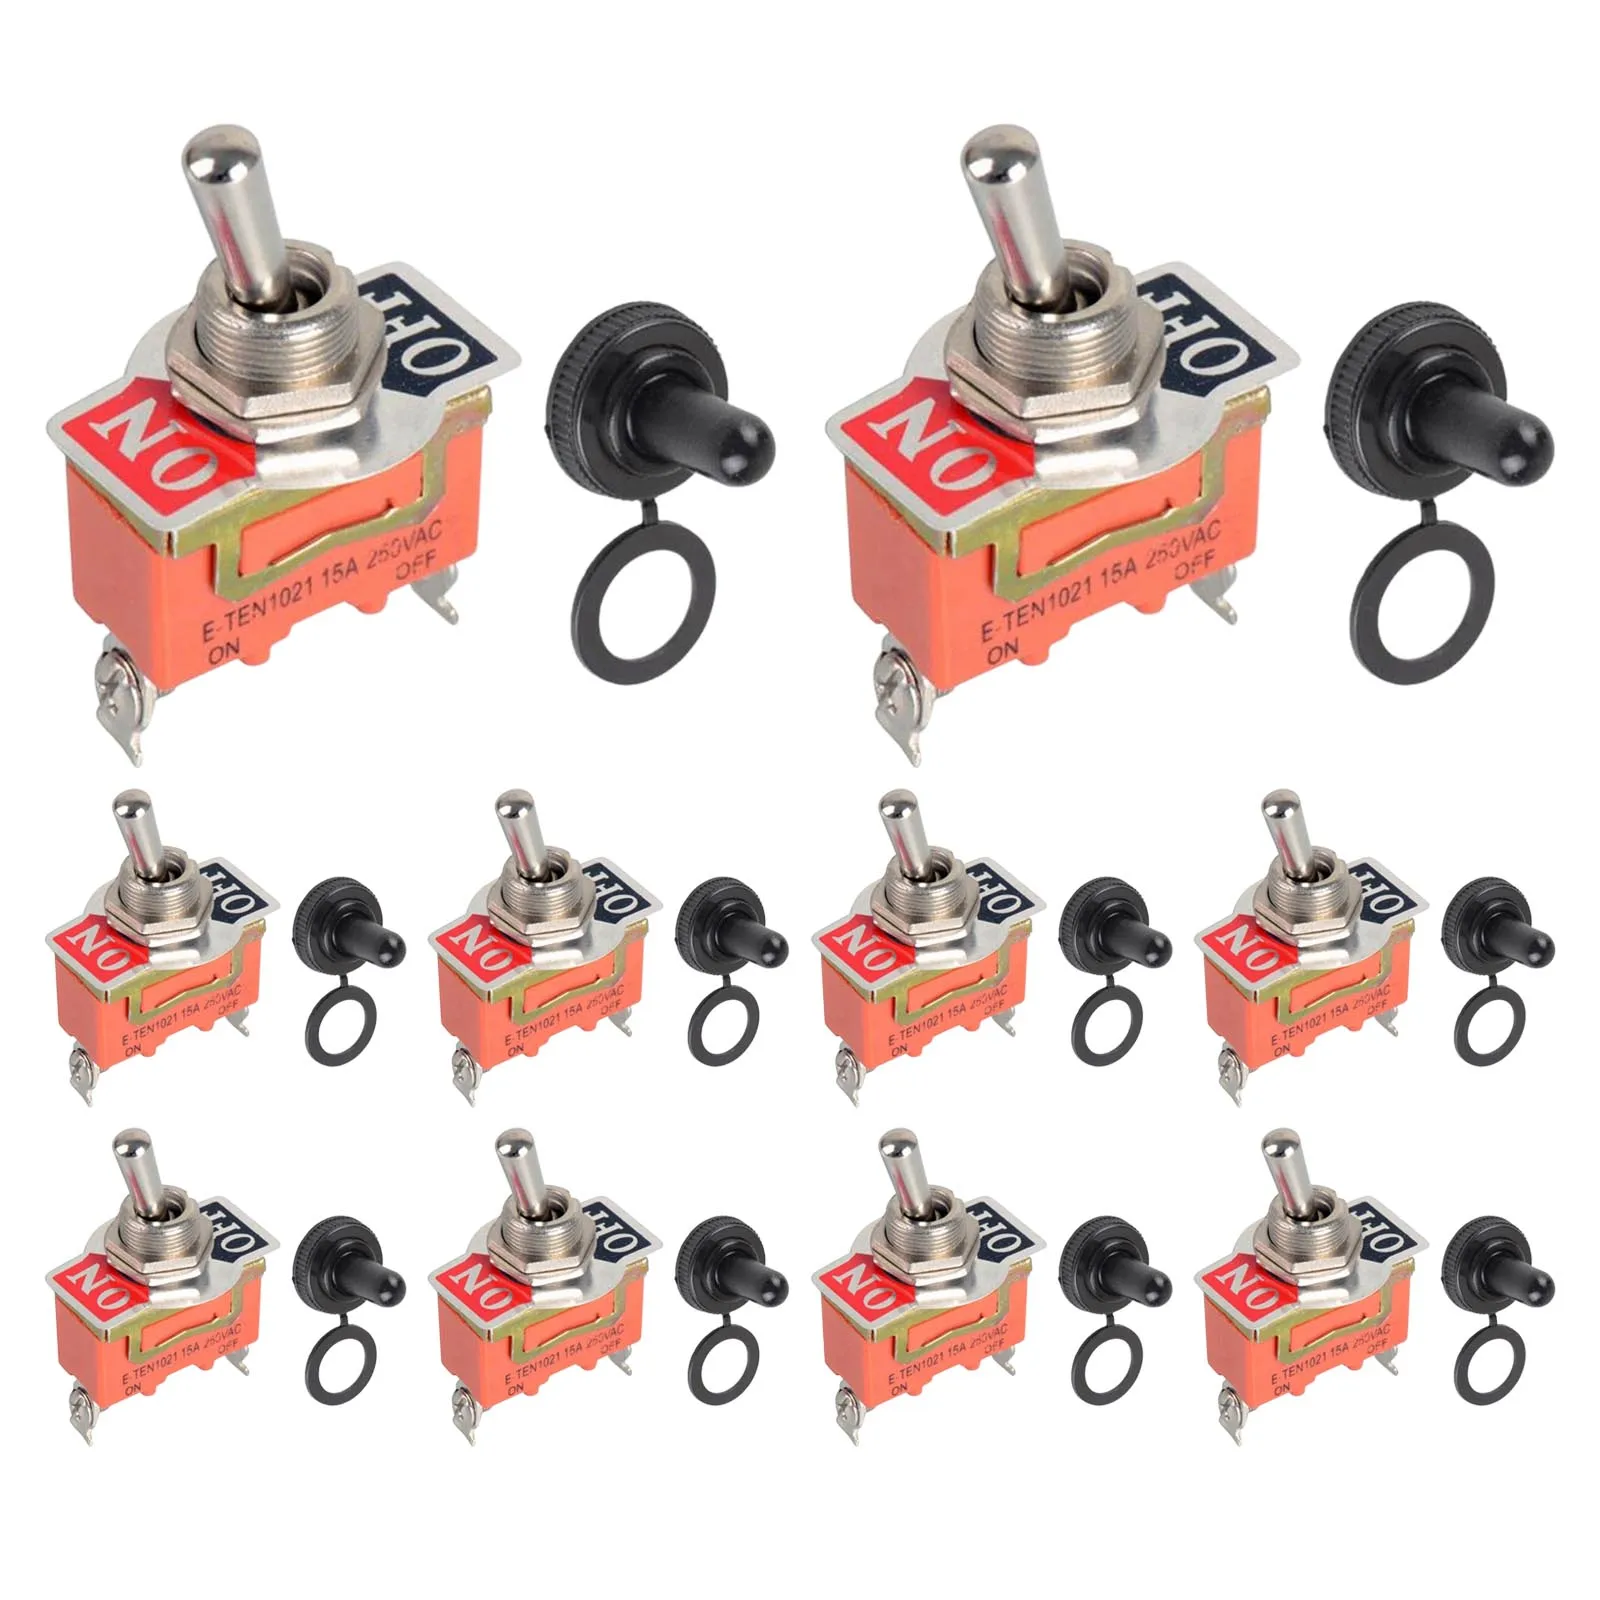 

10 Pack SPST 2-Pin Rocker Toggle Switch 220V/15A On/Off Switch With Metal Lever 2 Feet 2 Gears 12mm Toggle Switch